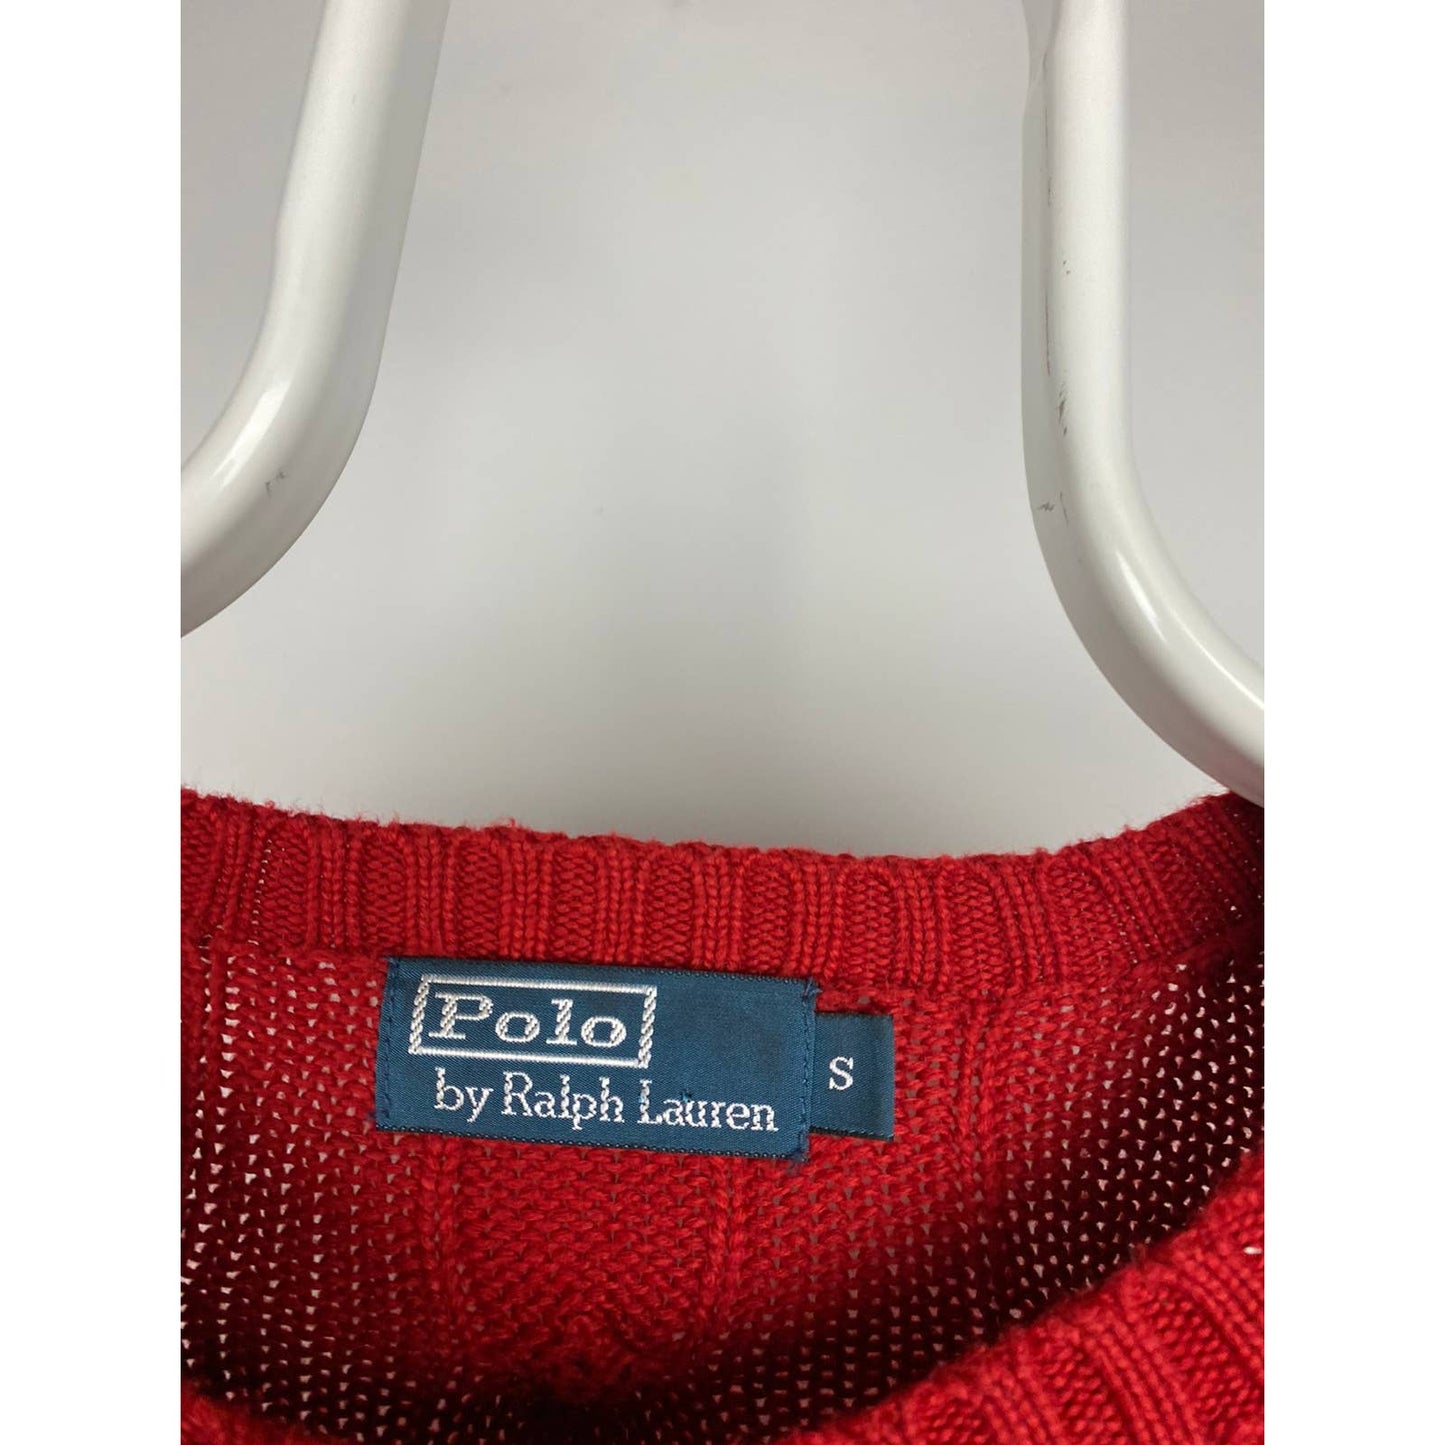 Polo Ralph Lauren vintage red cable knit sweater